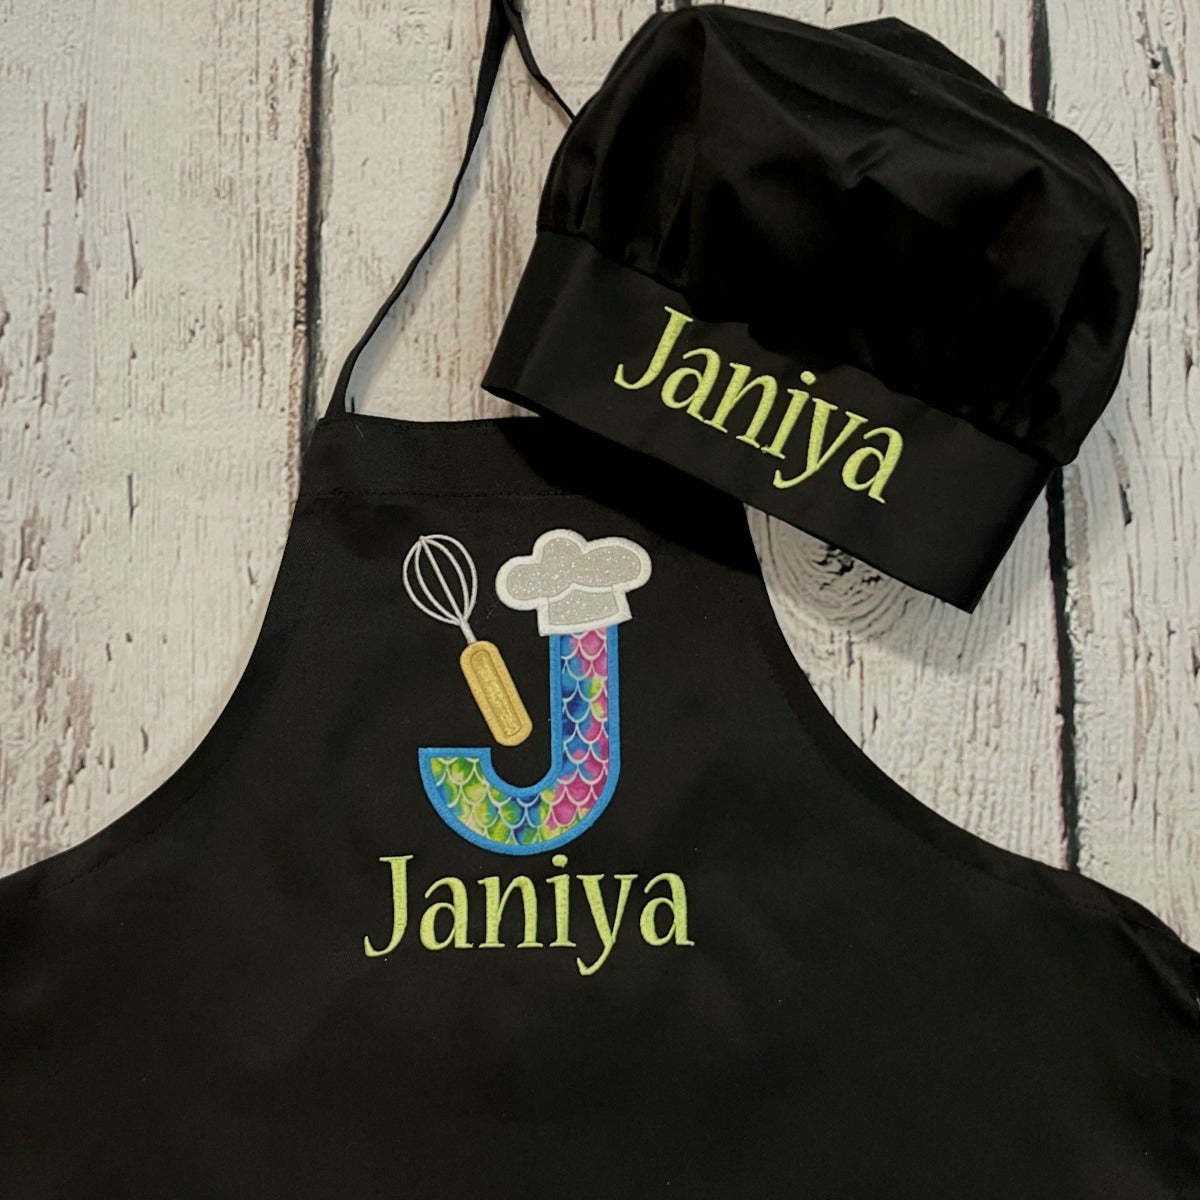 Mermaid themed girls embroidered personalized apron in black with matching chef hat